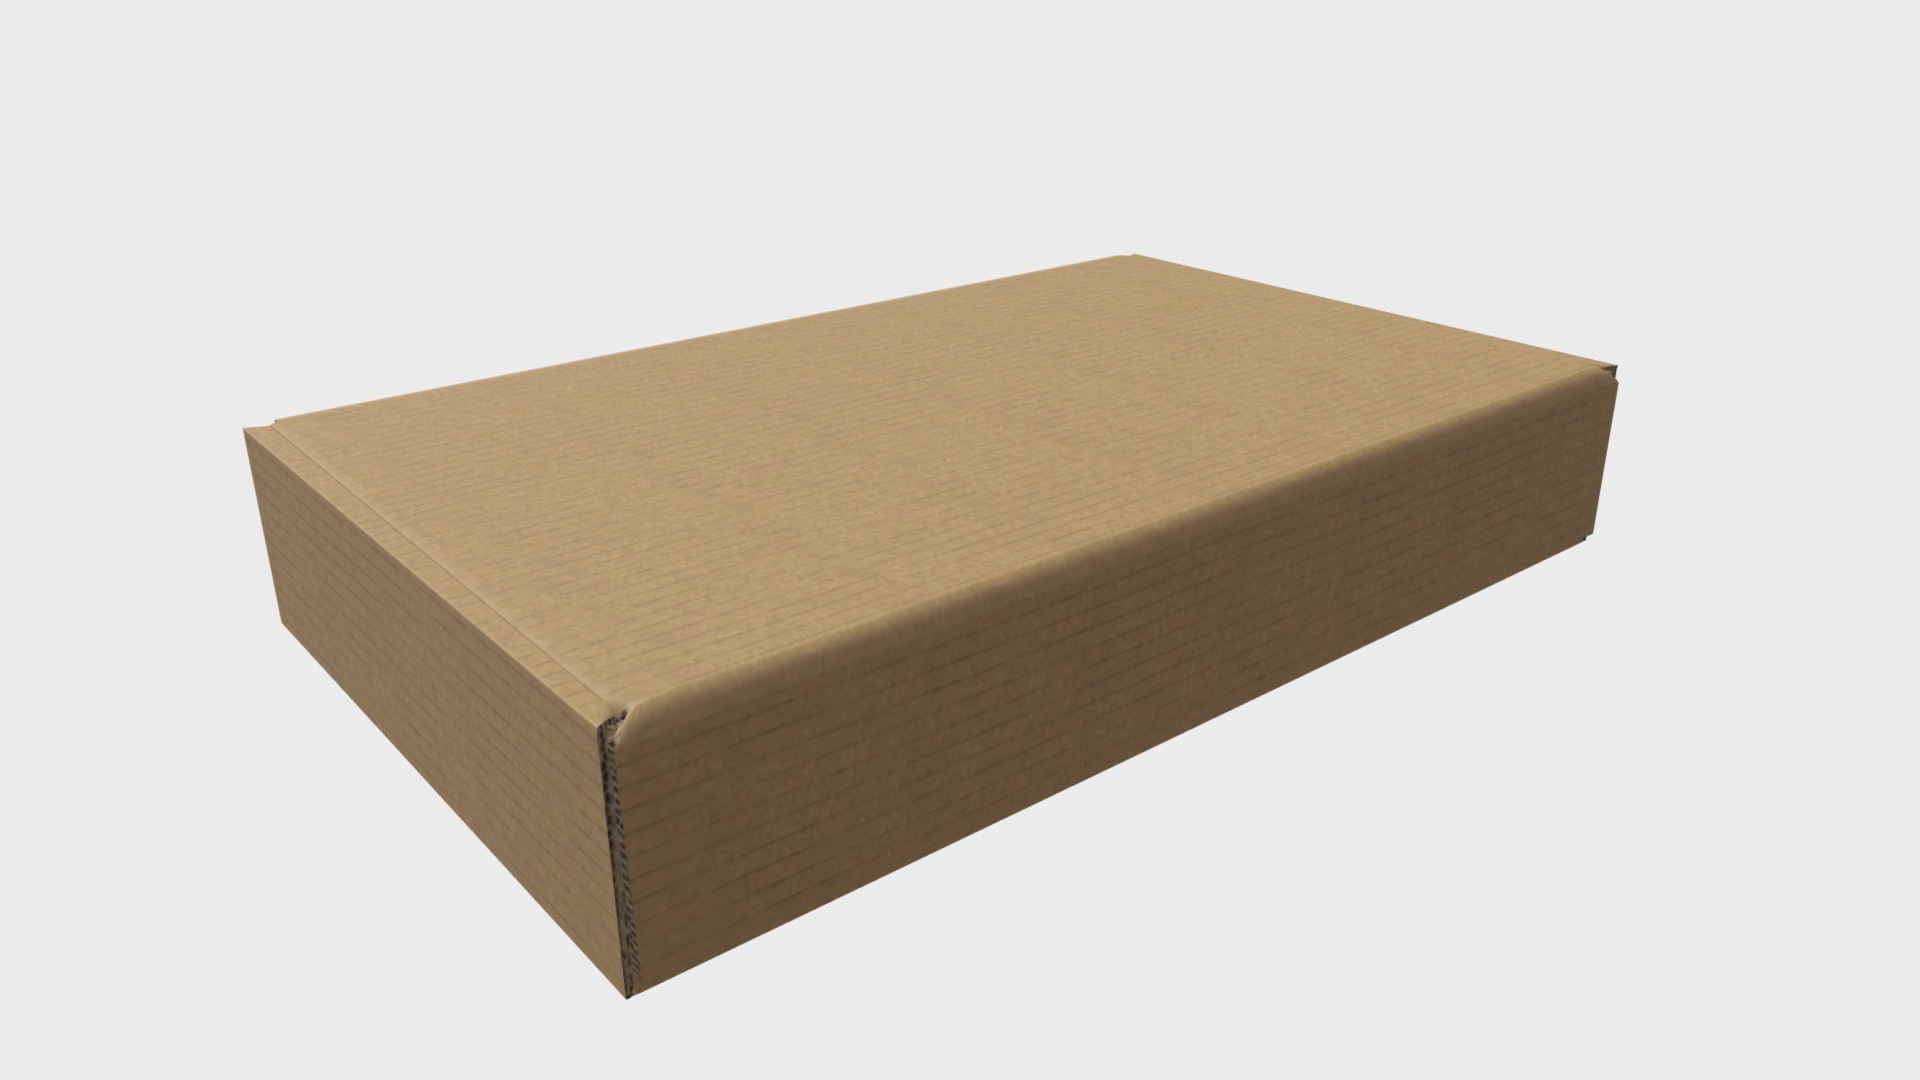 3D model Closed carton box - This is a 3D model of the Closed carton box. The 3D model is about a wooden box with a white background.